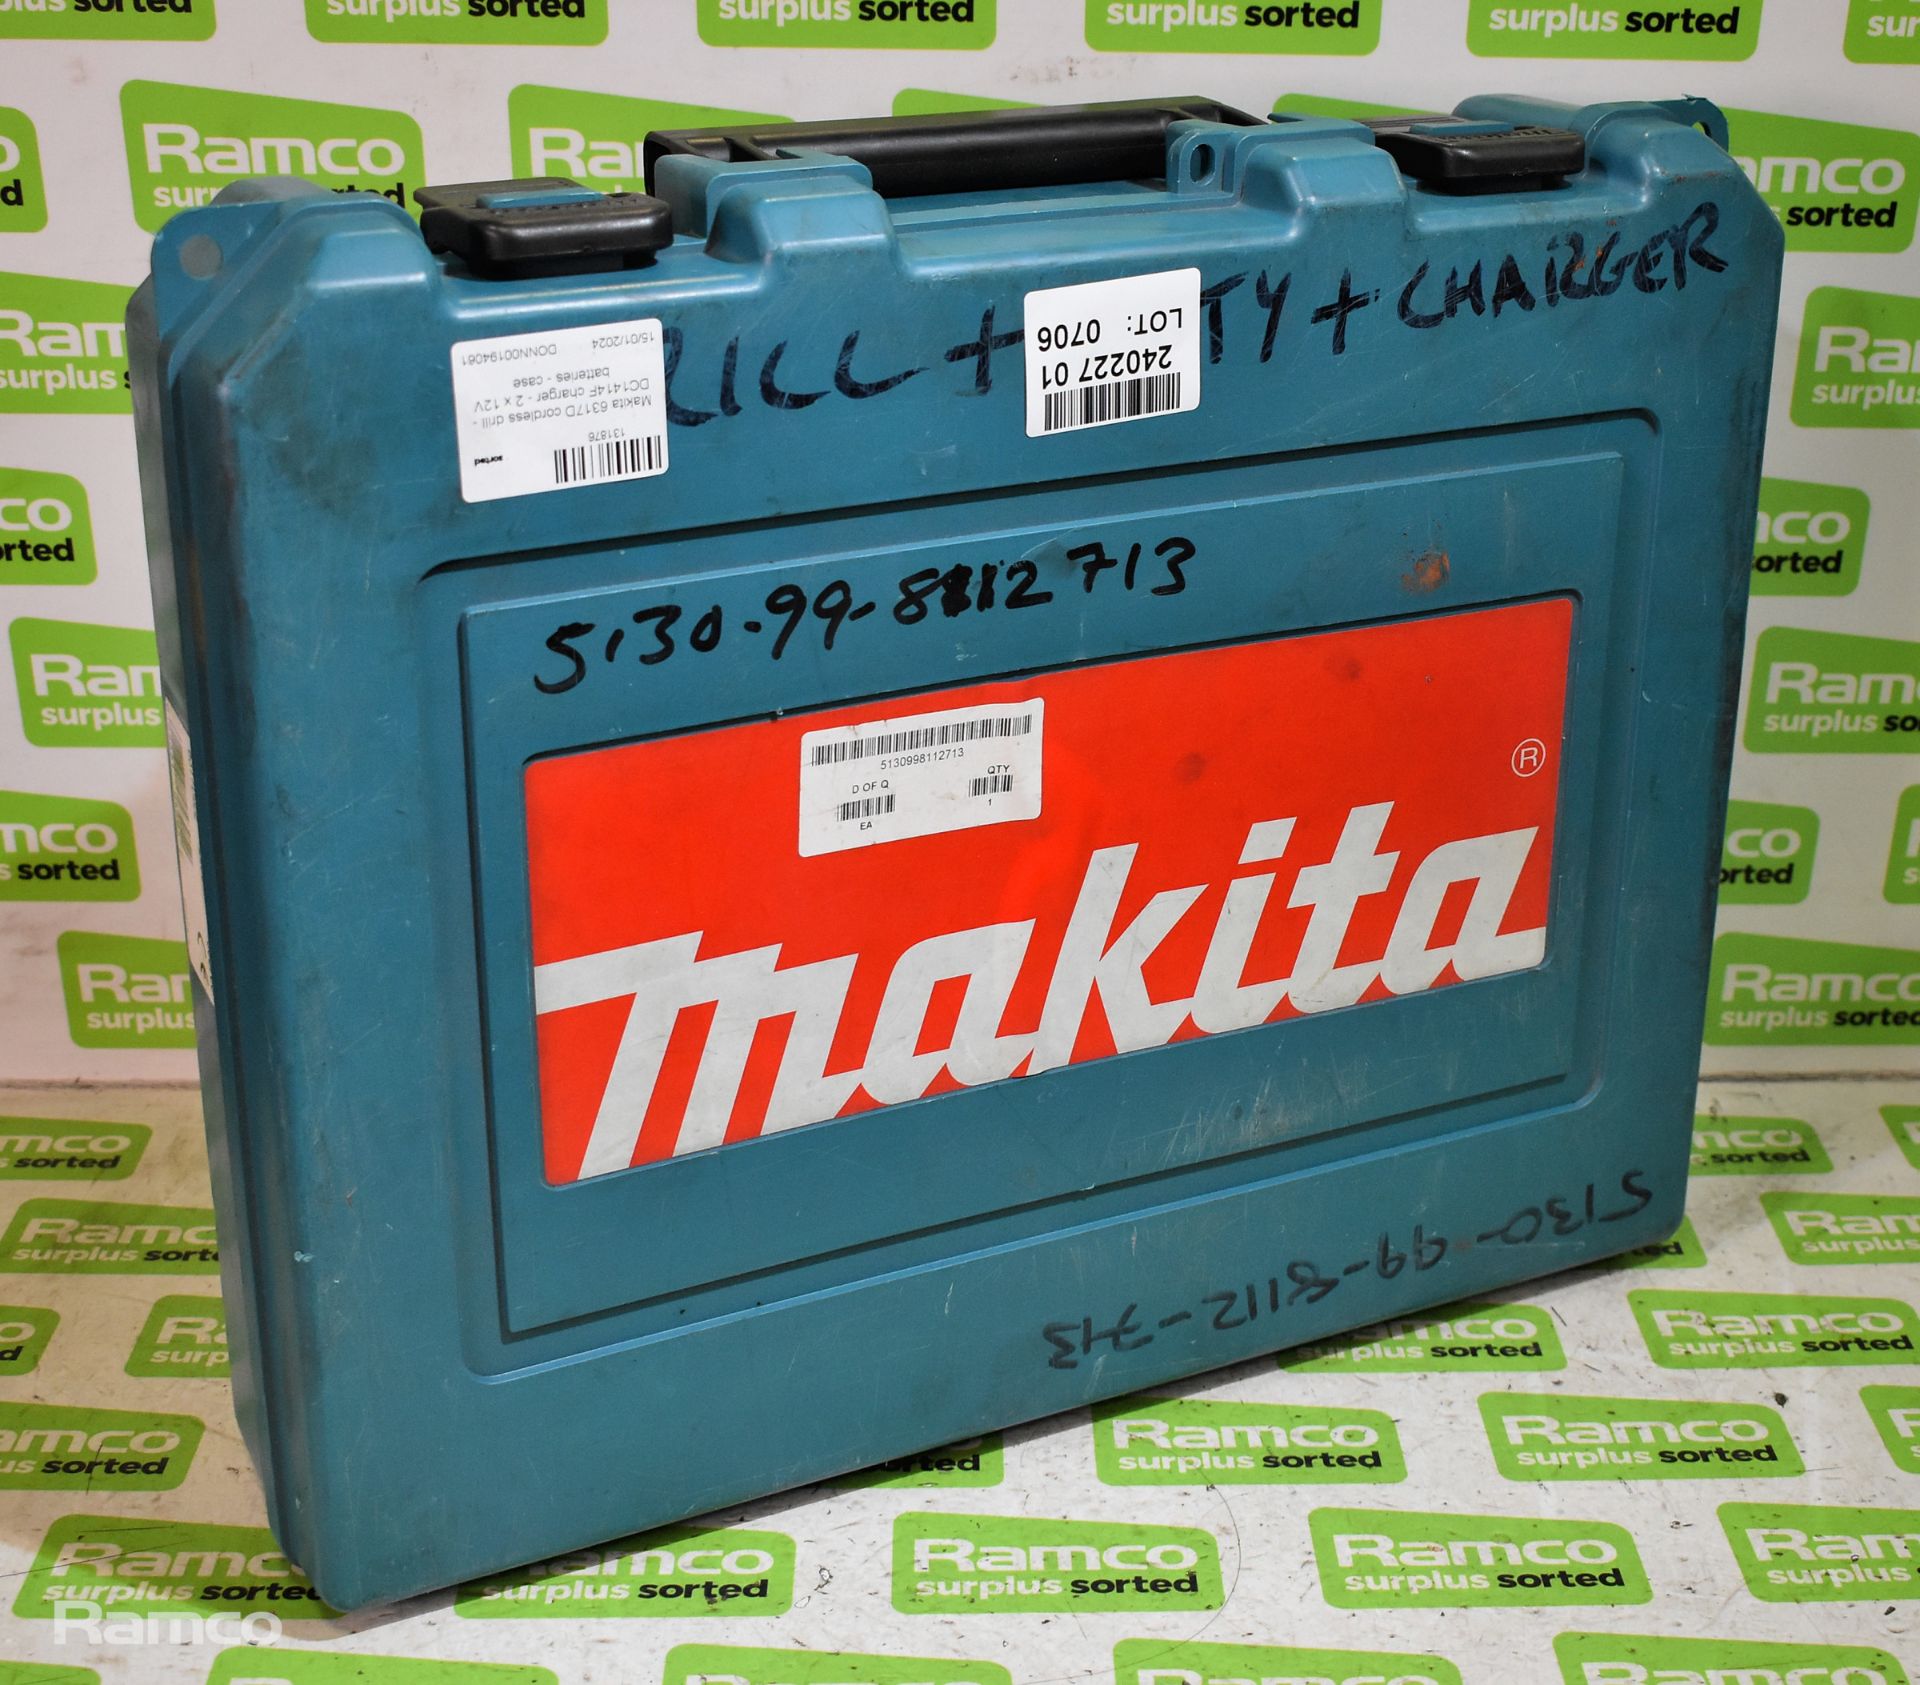 Makita 6317D cordless drill - DC1414F charger - 2 x 12V batteries - case - Image 6 of 6